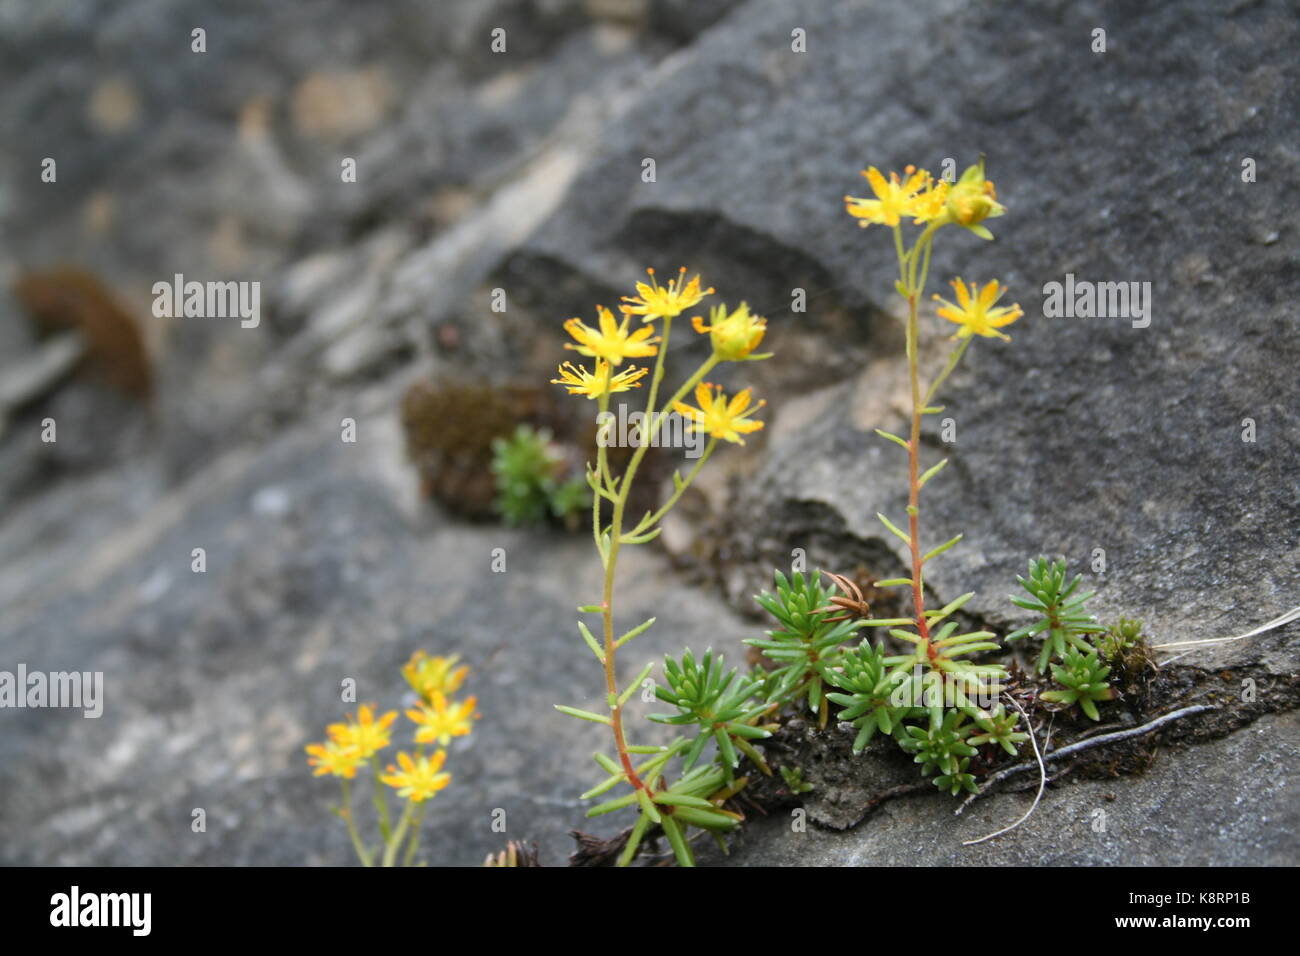 Unsorted plant images (Work in progress) Stock Photo